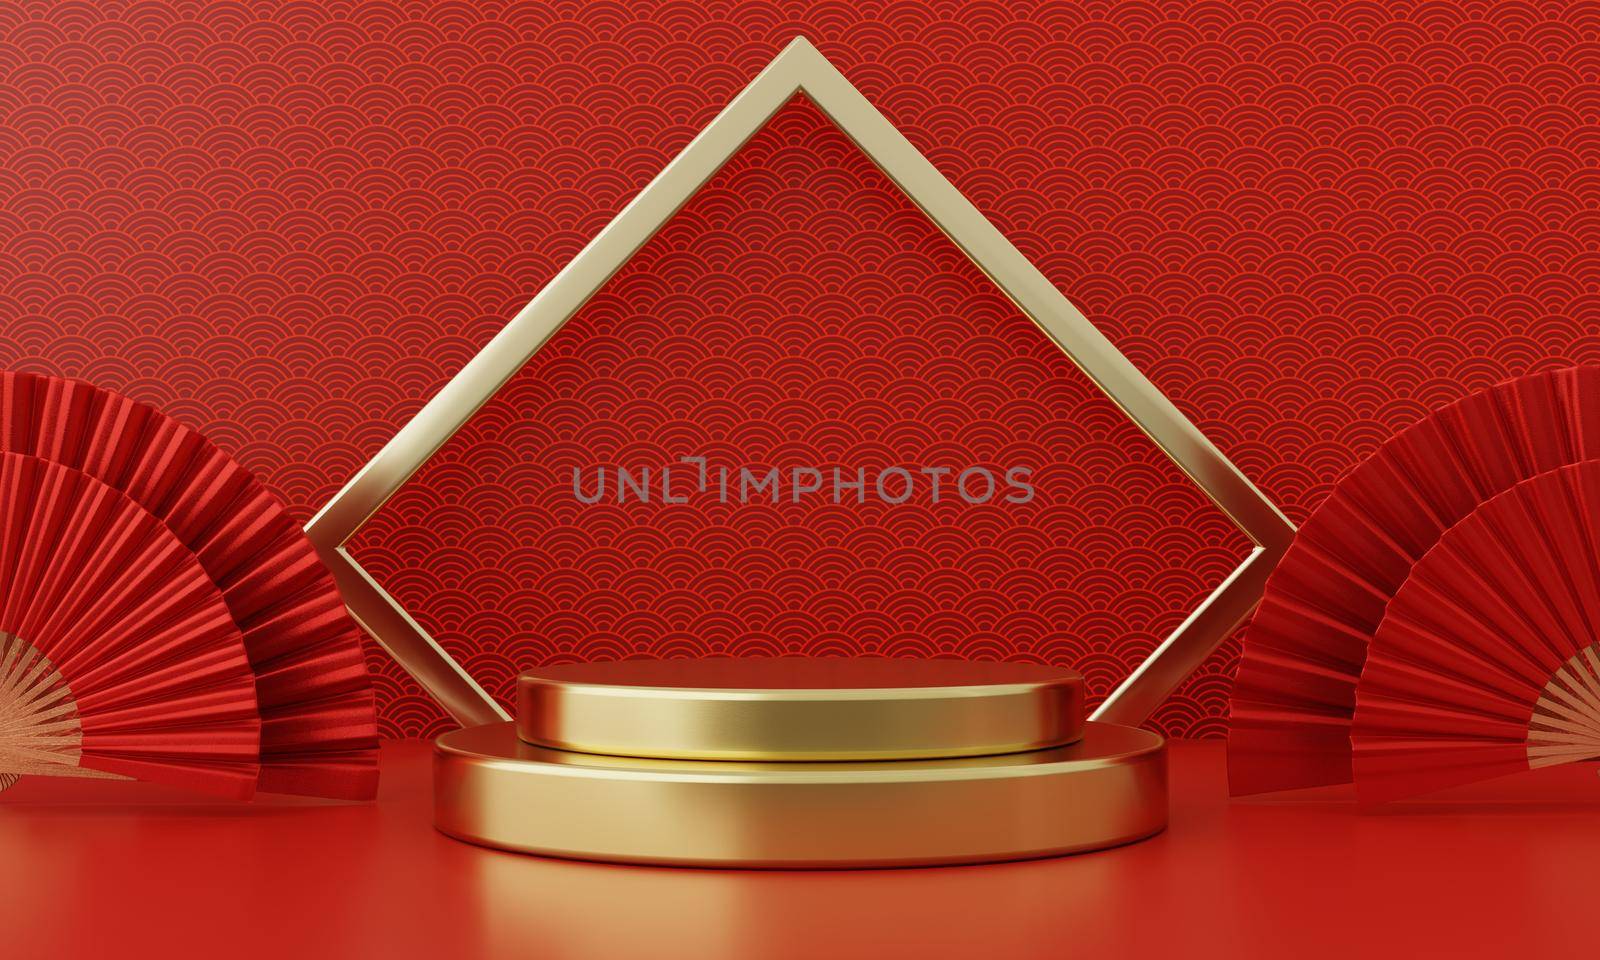 Chinese New Year red modern style one podium product showcase with golden ring frame and China pattern background. Happy holiday traditional festival concept. 3D illustration rendering graphic design